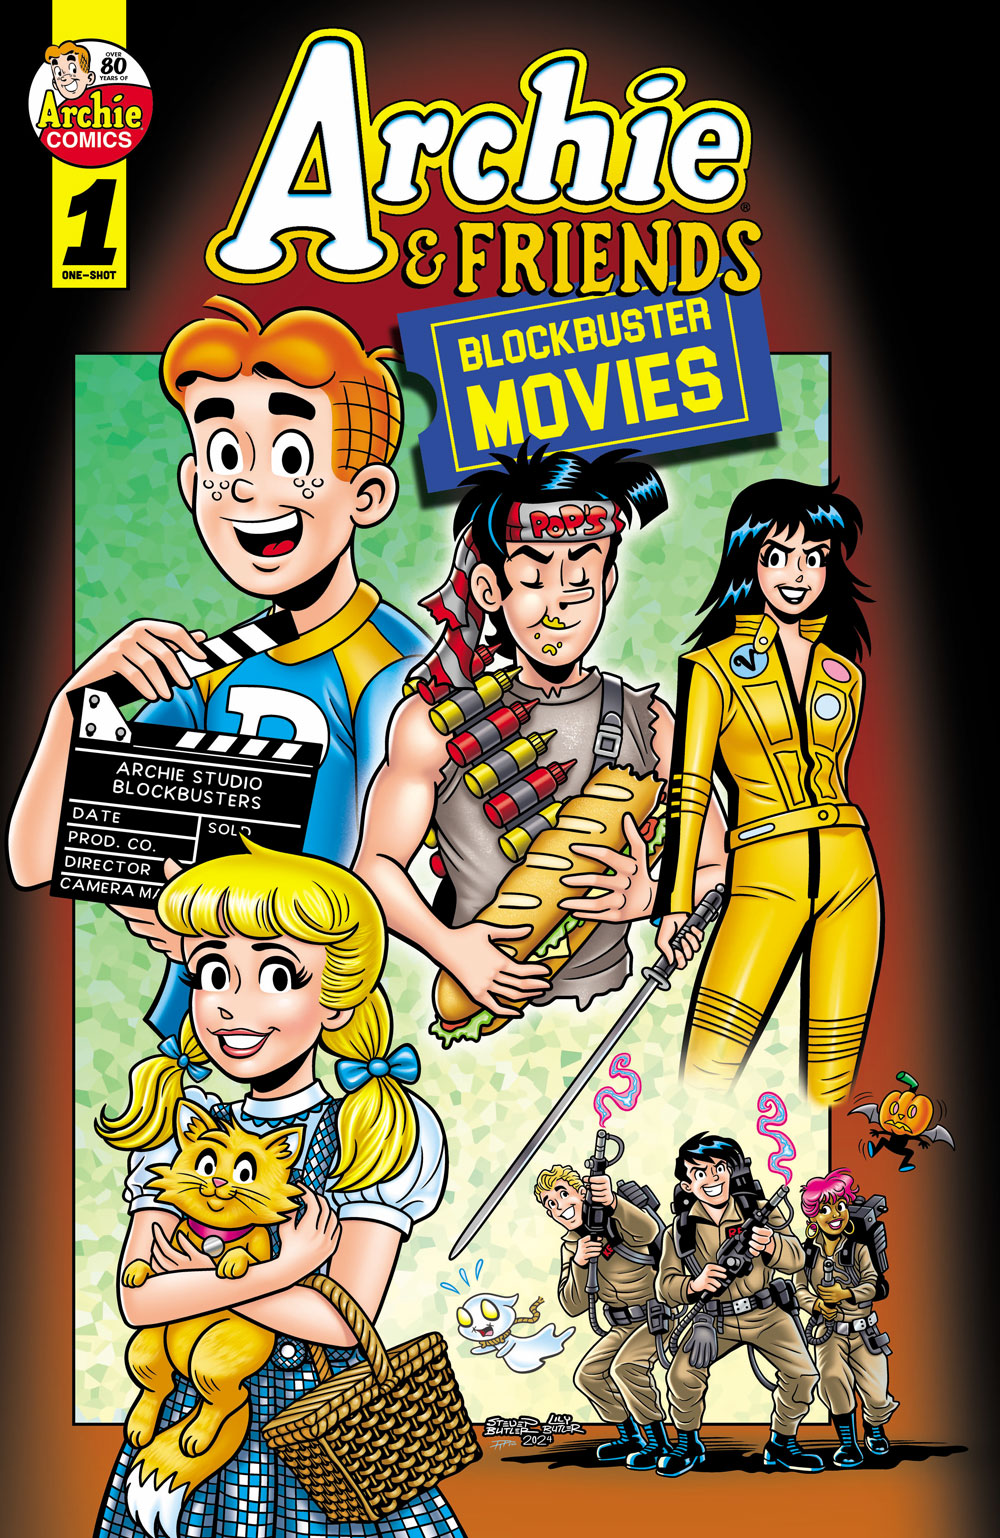 The Riverdale gang pose as various characters from blockbuster films, except Archie who is wearing his normal clothes and holds a clapperboard that says: Archie Studio Blockbusters. Jughead is dressed like Rambo and is holding a huge submarine snadwich. Betty is dressed as The Bride from the movie Kill Bill, in a yellow jumpsuit and holding a sword. Kevin, Reggie, and Toni are dressed as Ghostbusters, while Trick and Treat the Halloween imps float behind them with scared looks on their faces. Betty is dressed as Dorothy from the Wizard of Oz, with pigtails and a blue dress, and she is holding her orange cat Caramel.